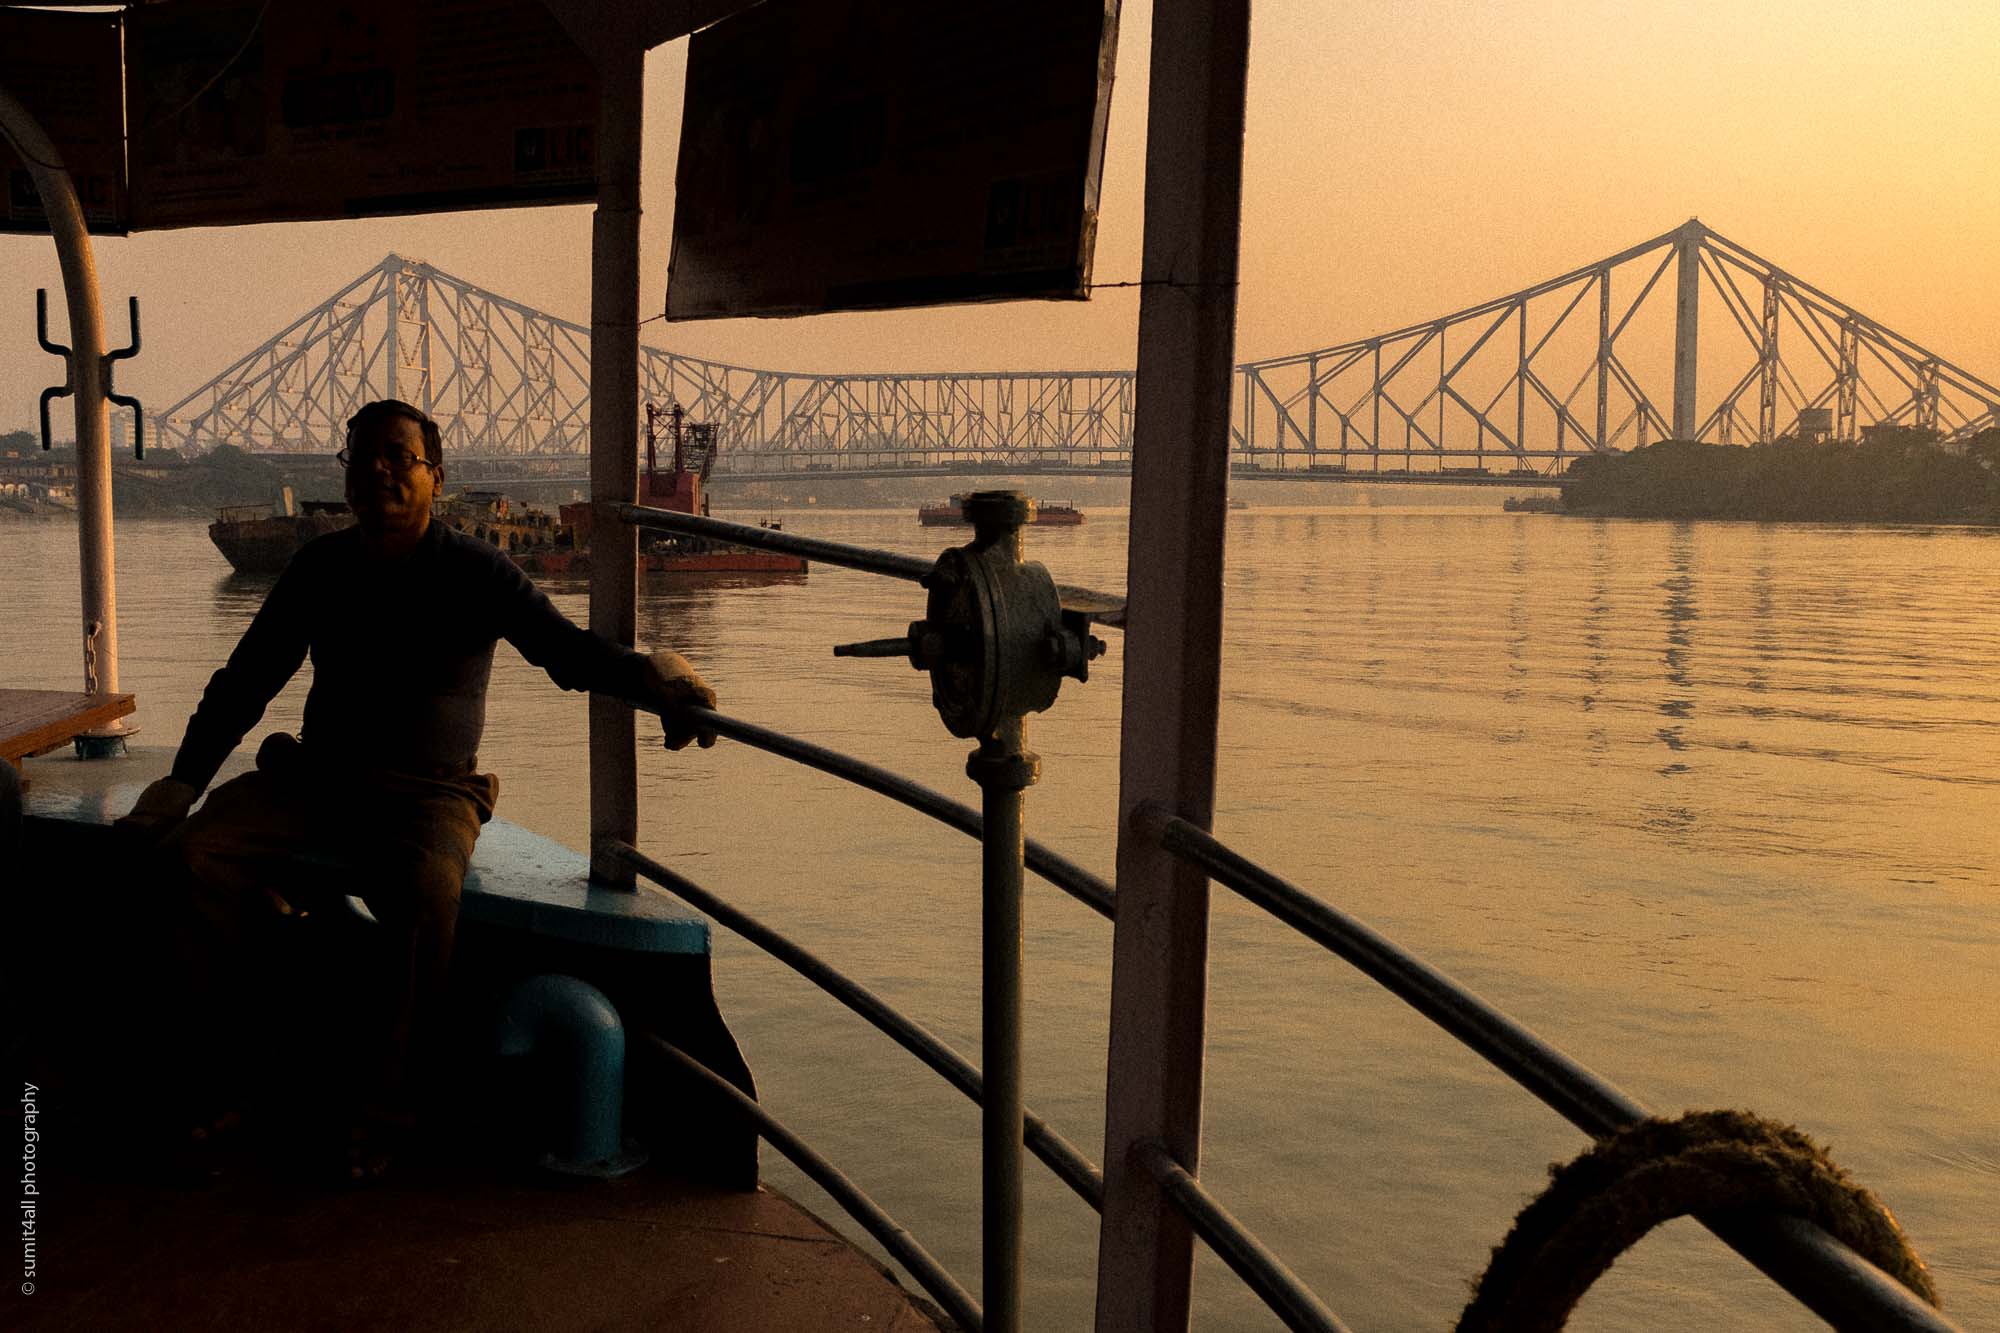 Sunset over the Hooghly River in Kolkata